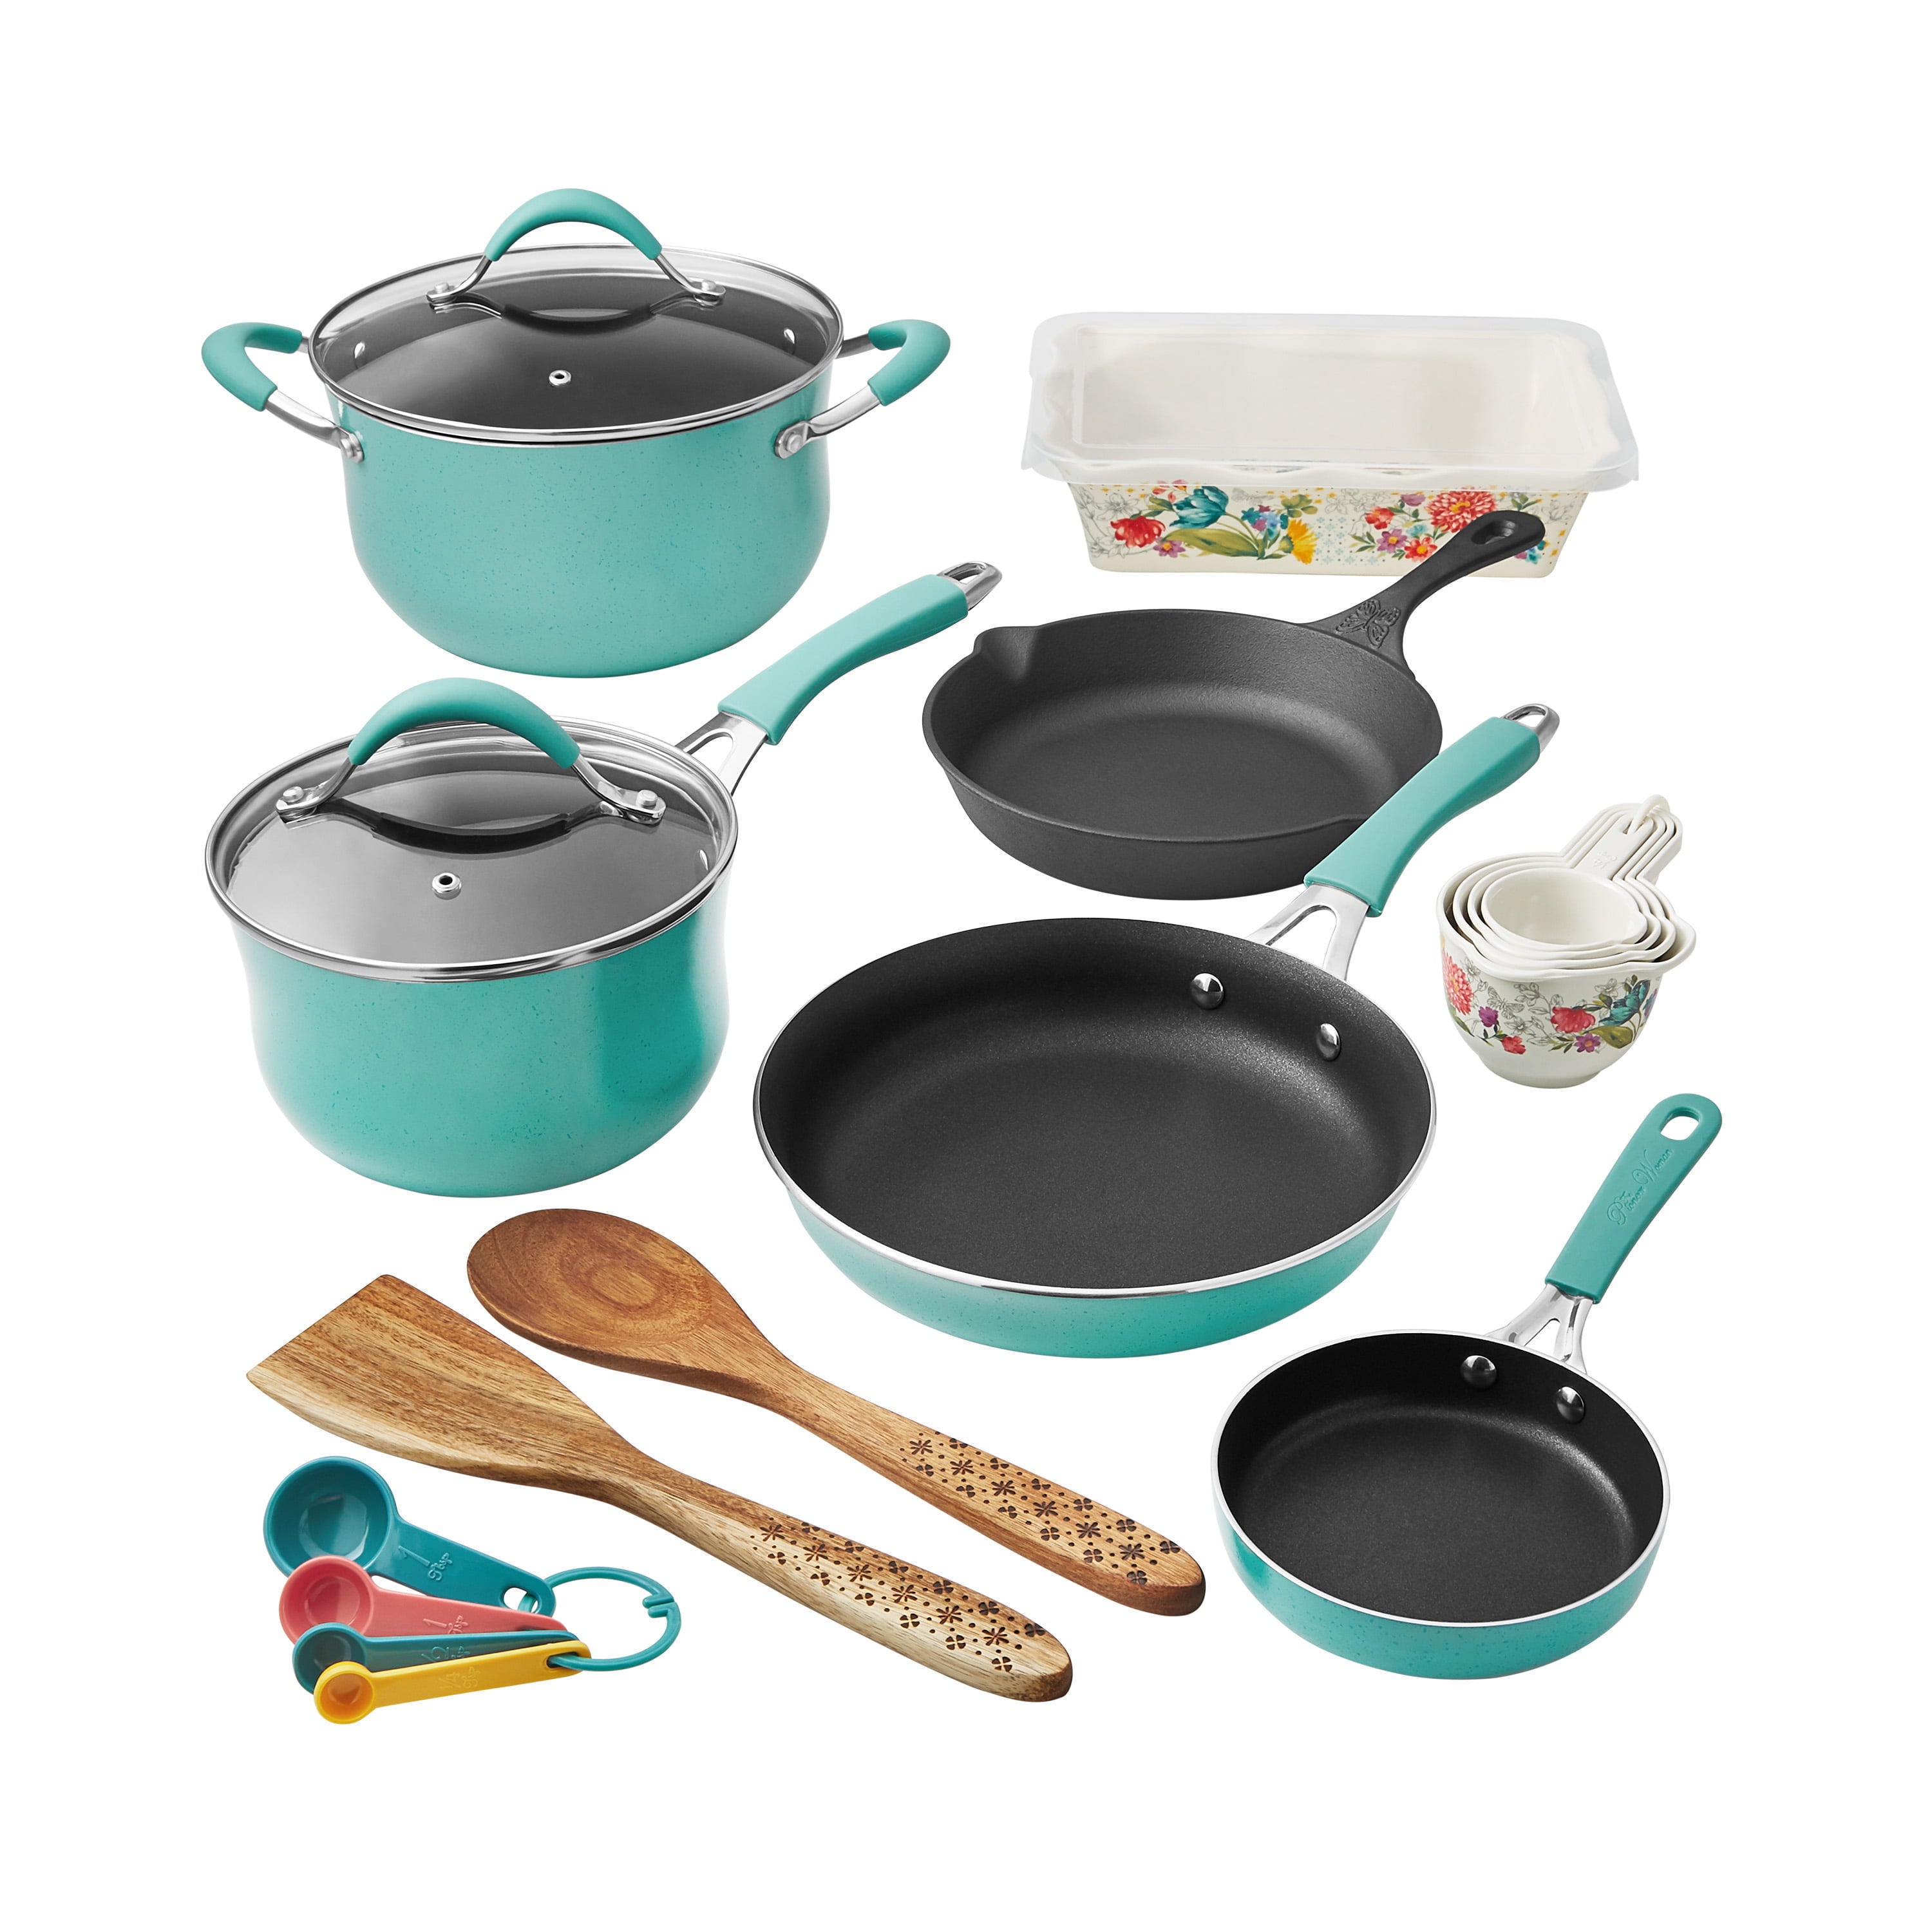 The Pioneer Woman Timeless Beauty Turquoise Aluminum 8-Inch Fry